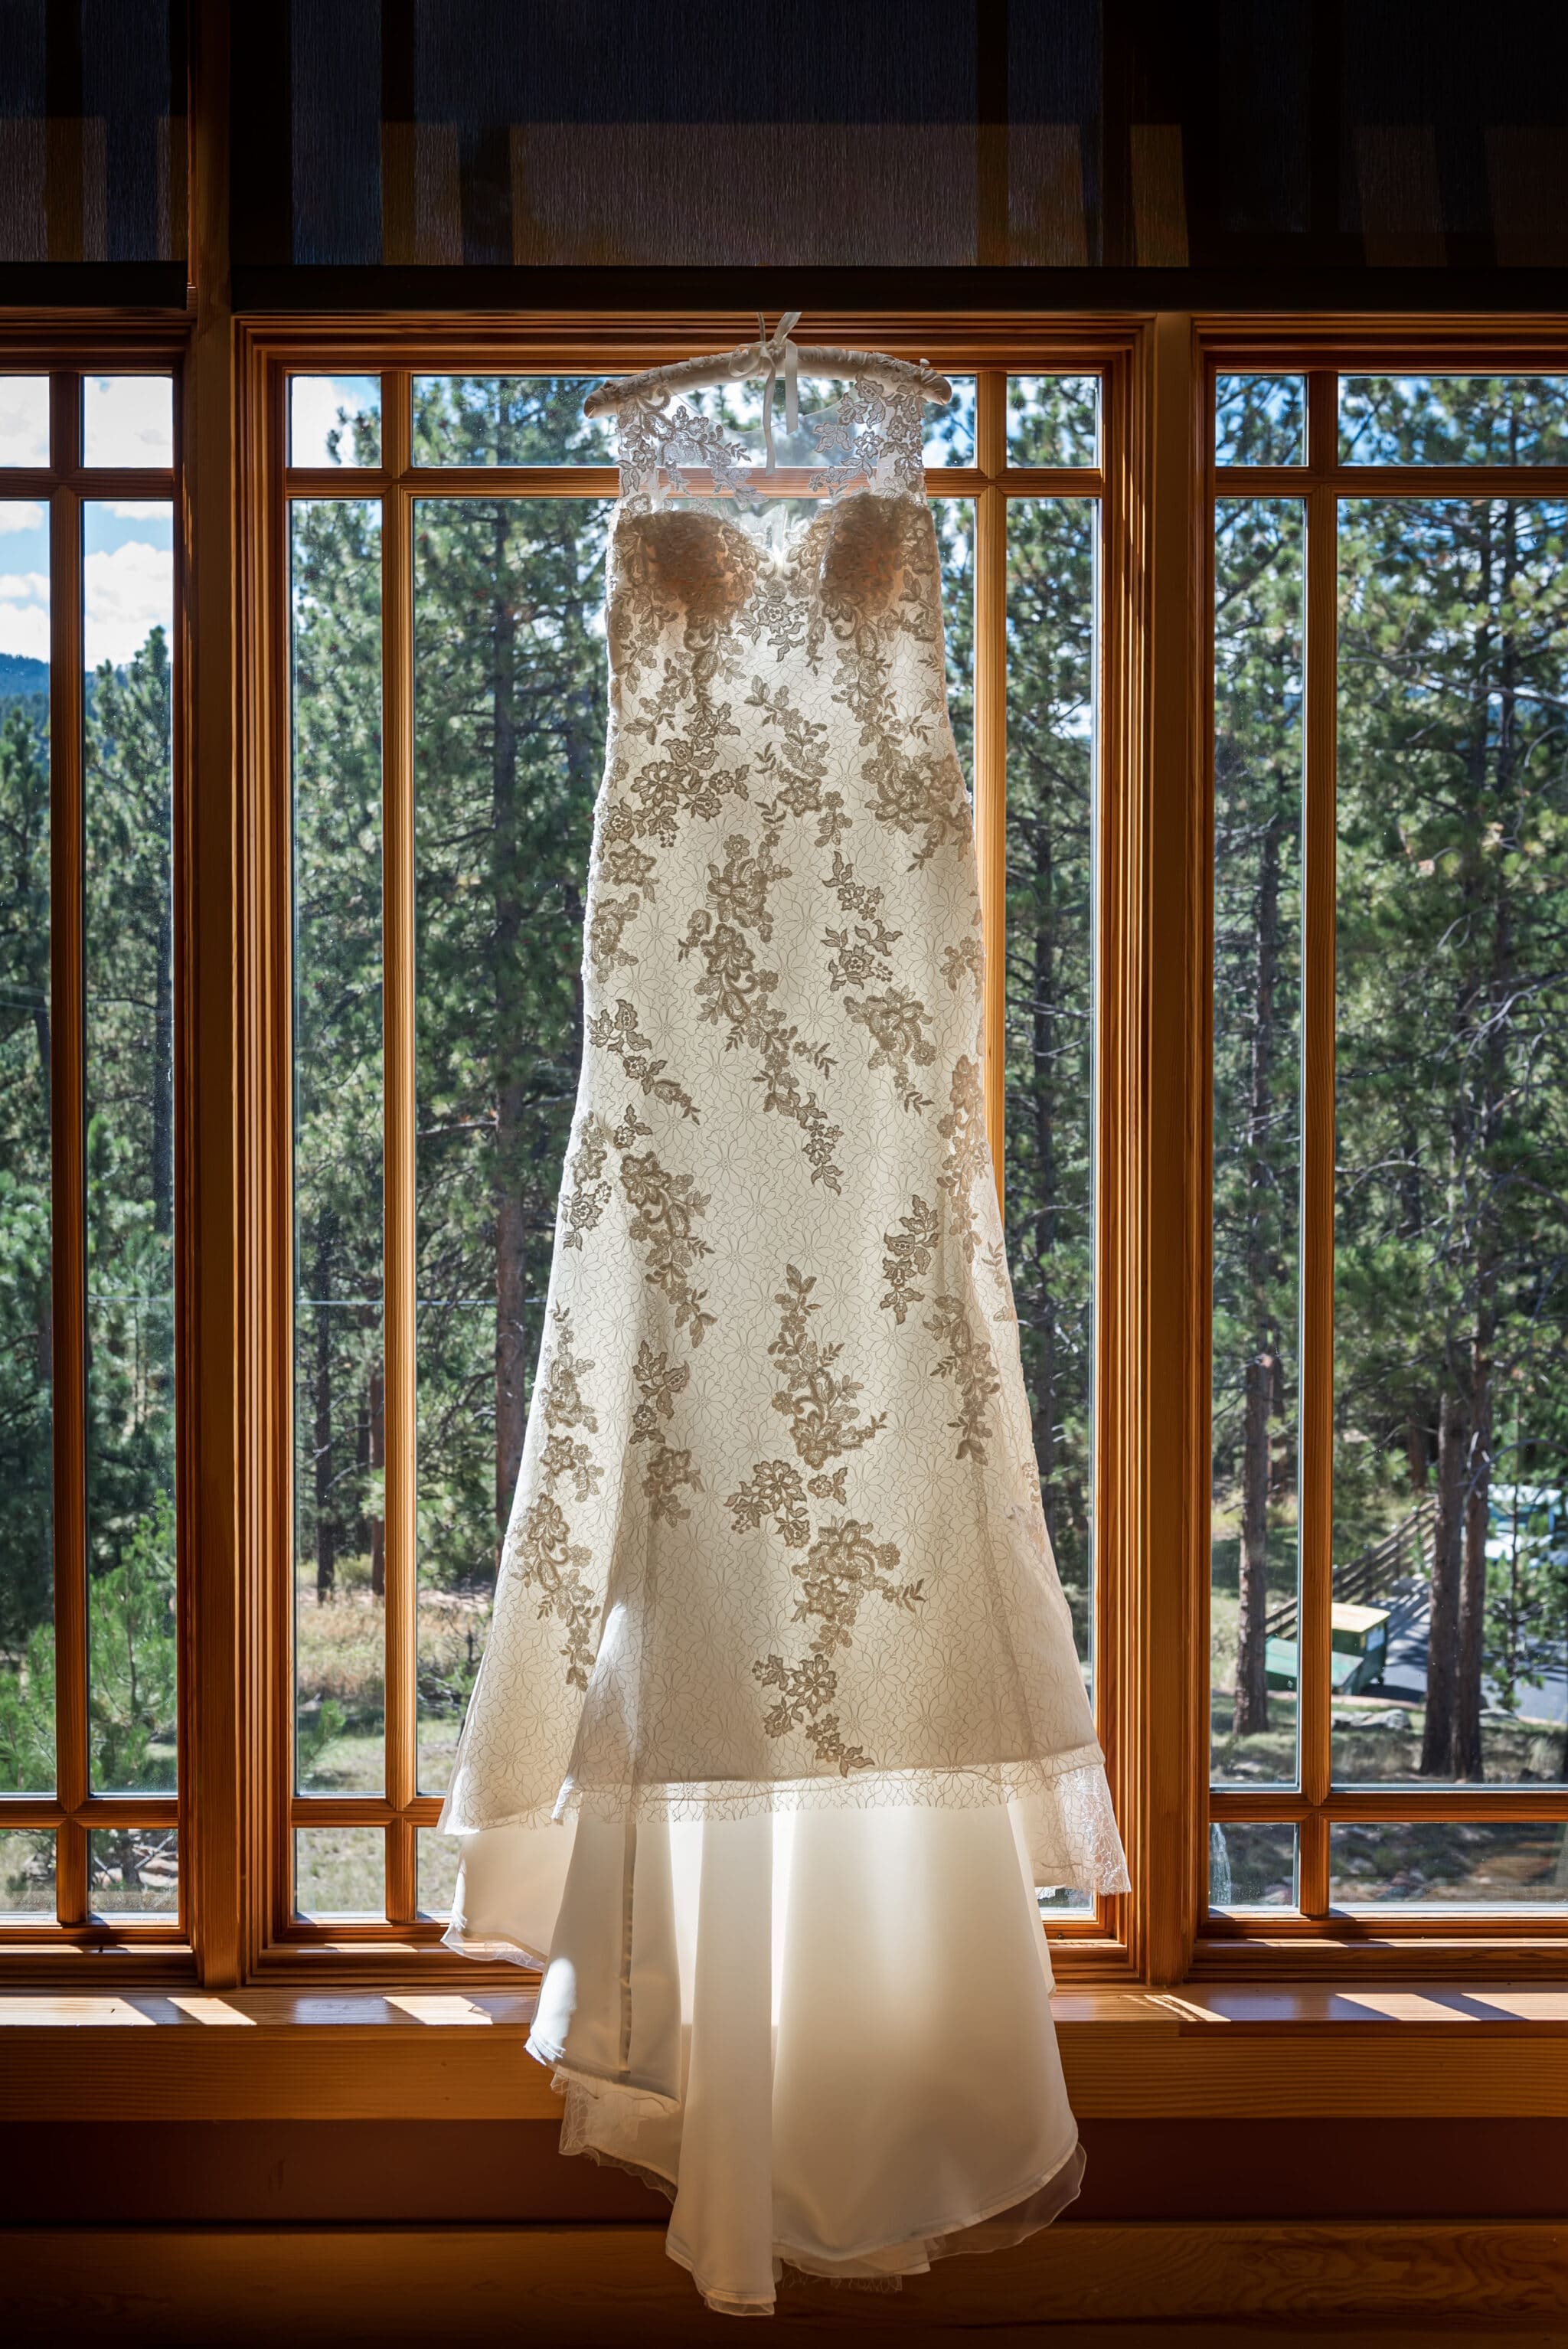 Wedding dress framed in a wooden window frame with sunlight illuminating the lace.